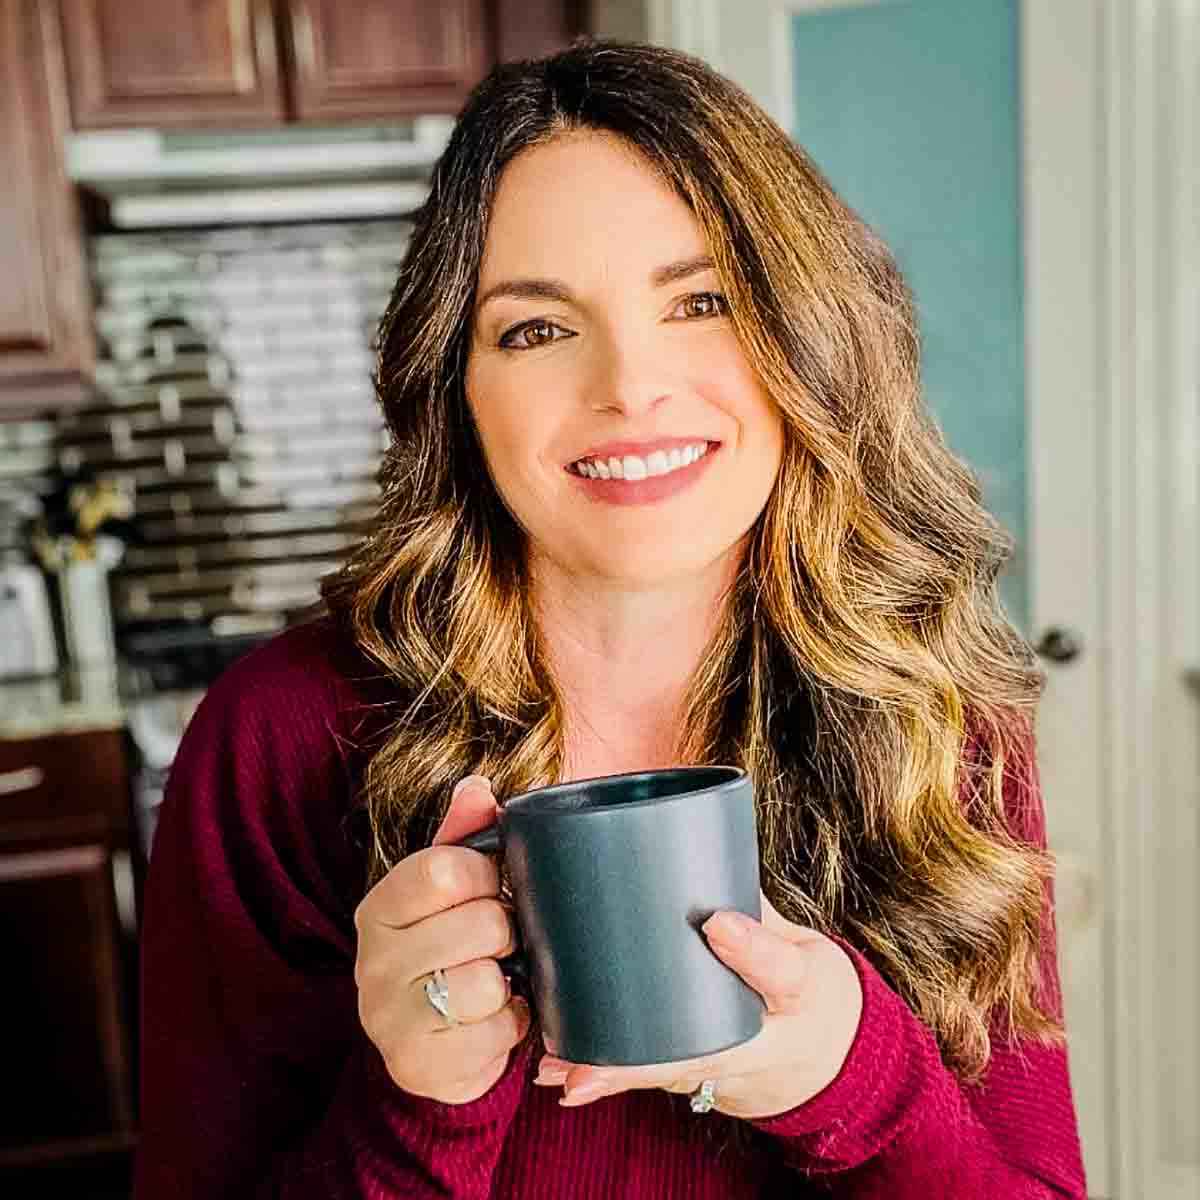 A photo of Jeri Walker smiling in her kitchen while holding a cup of coffee, welcoming her readers to her website.